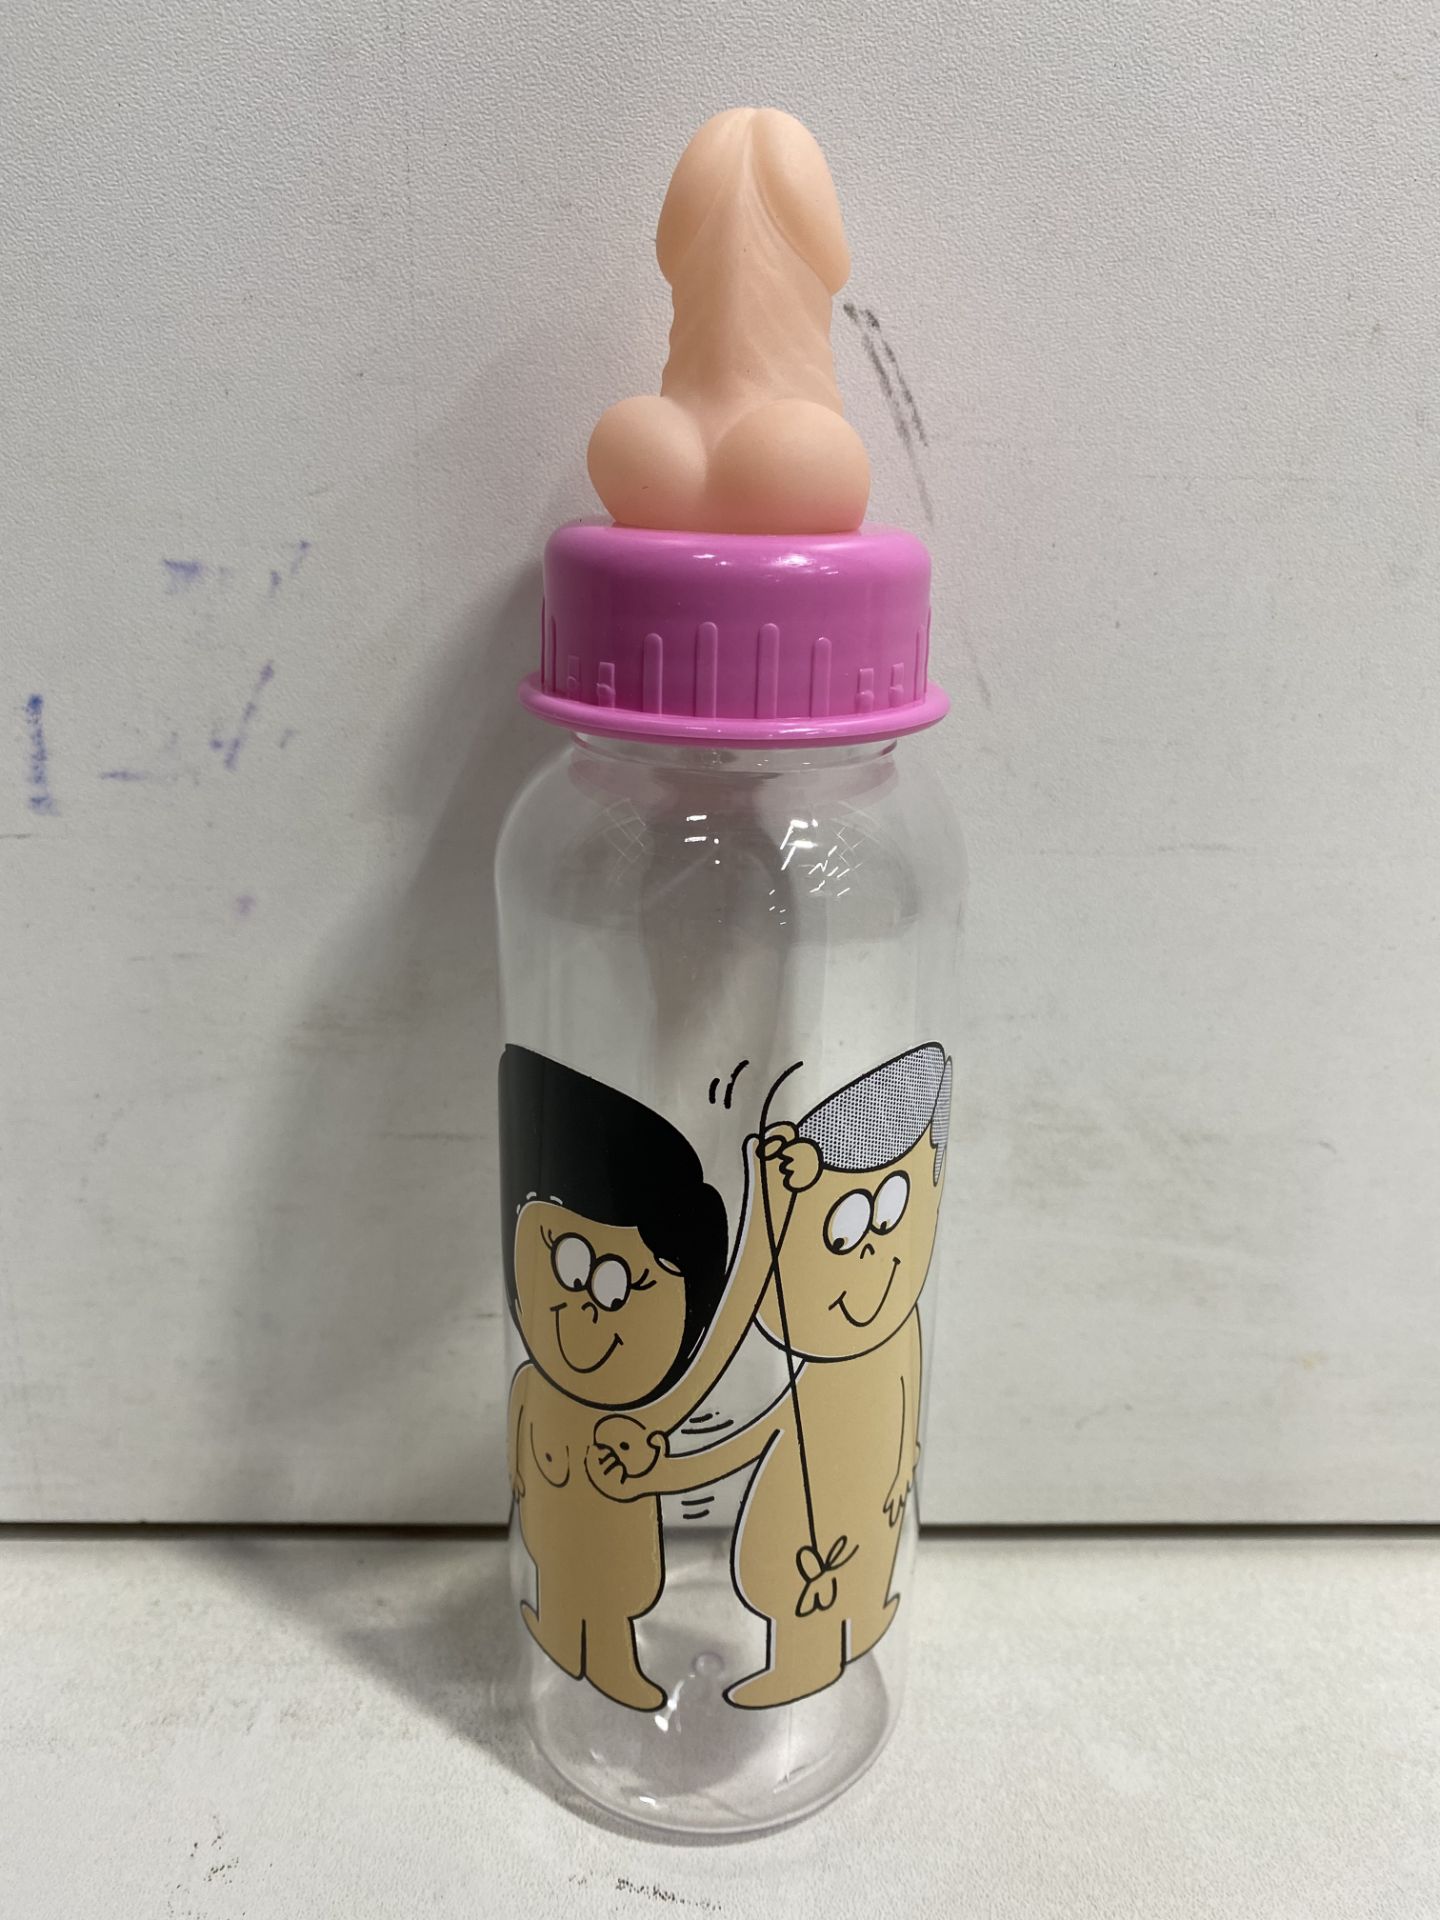 14 x Big Girl Bottle With Penis Mouthpiece - Image 3 of 3